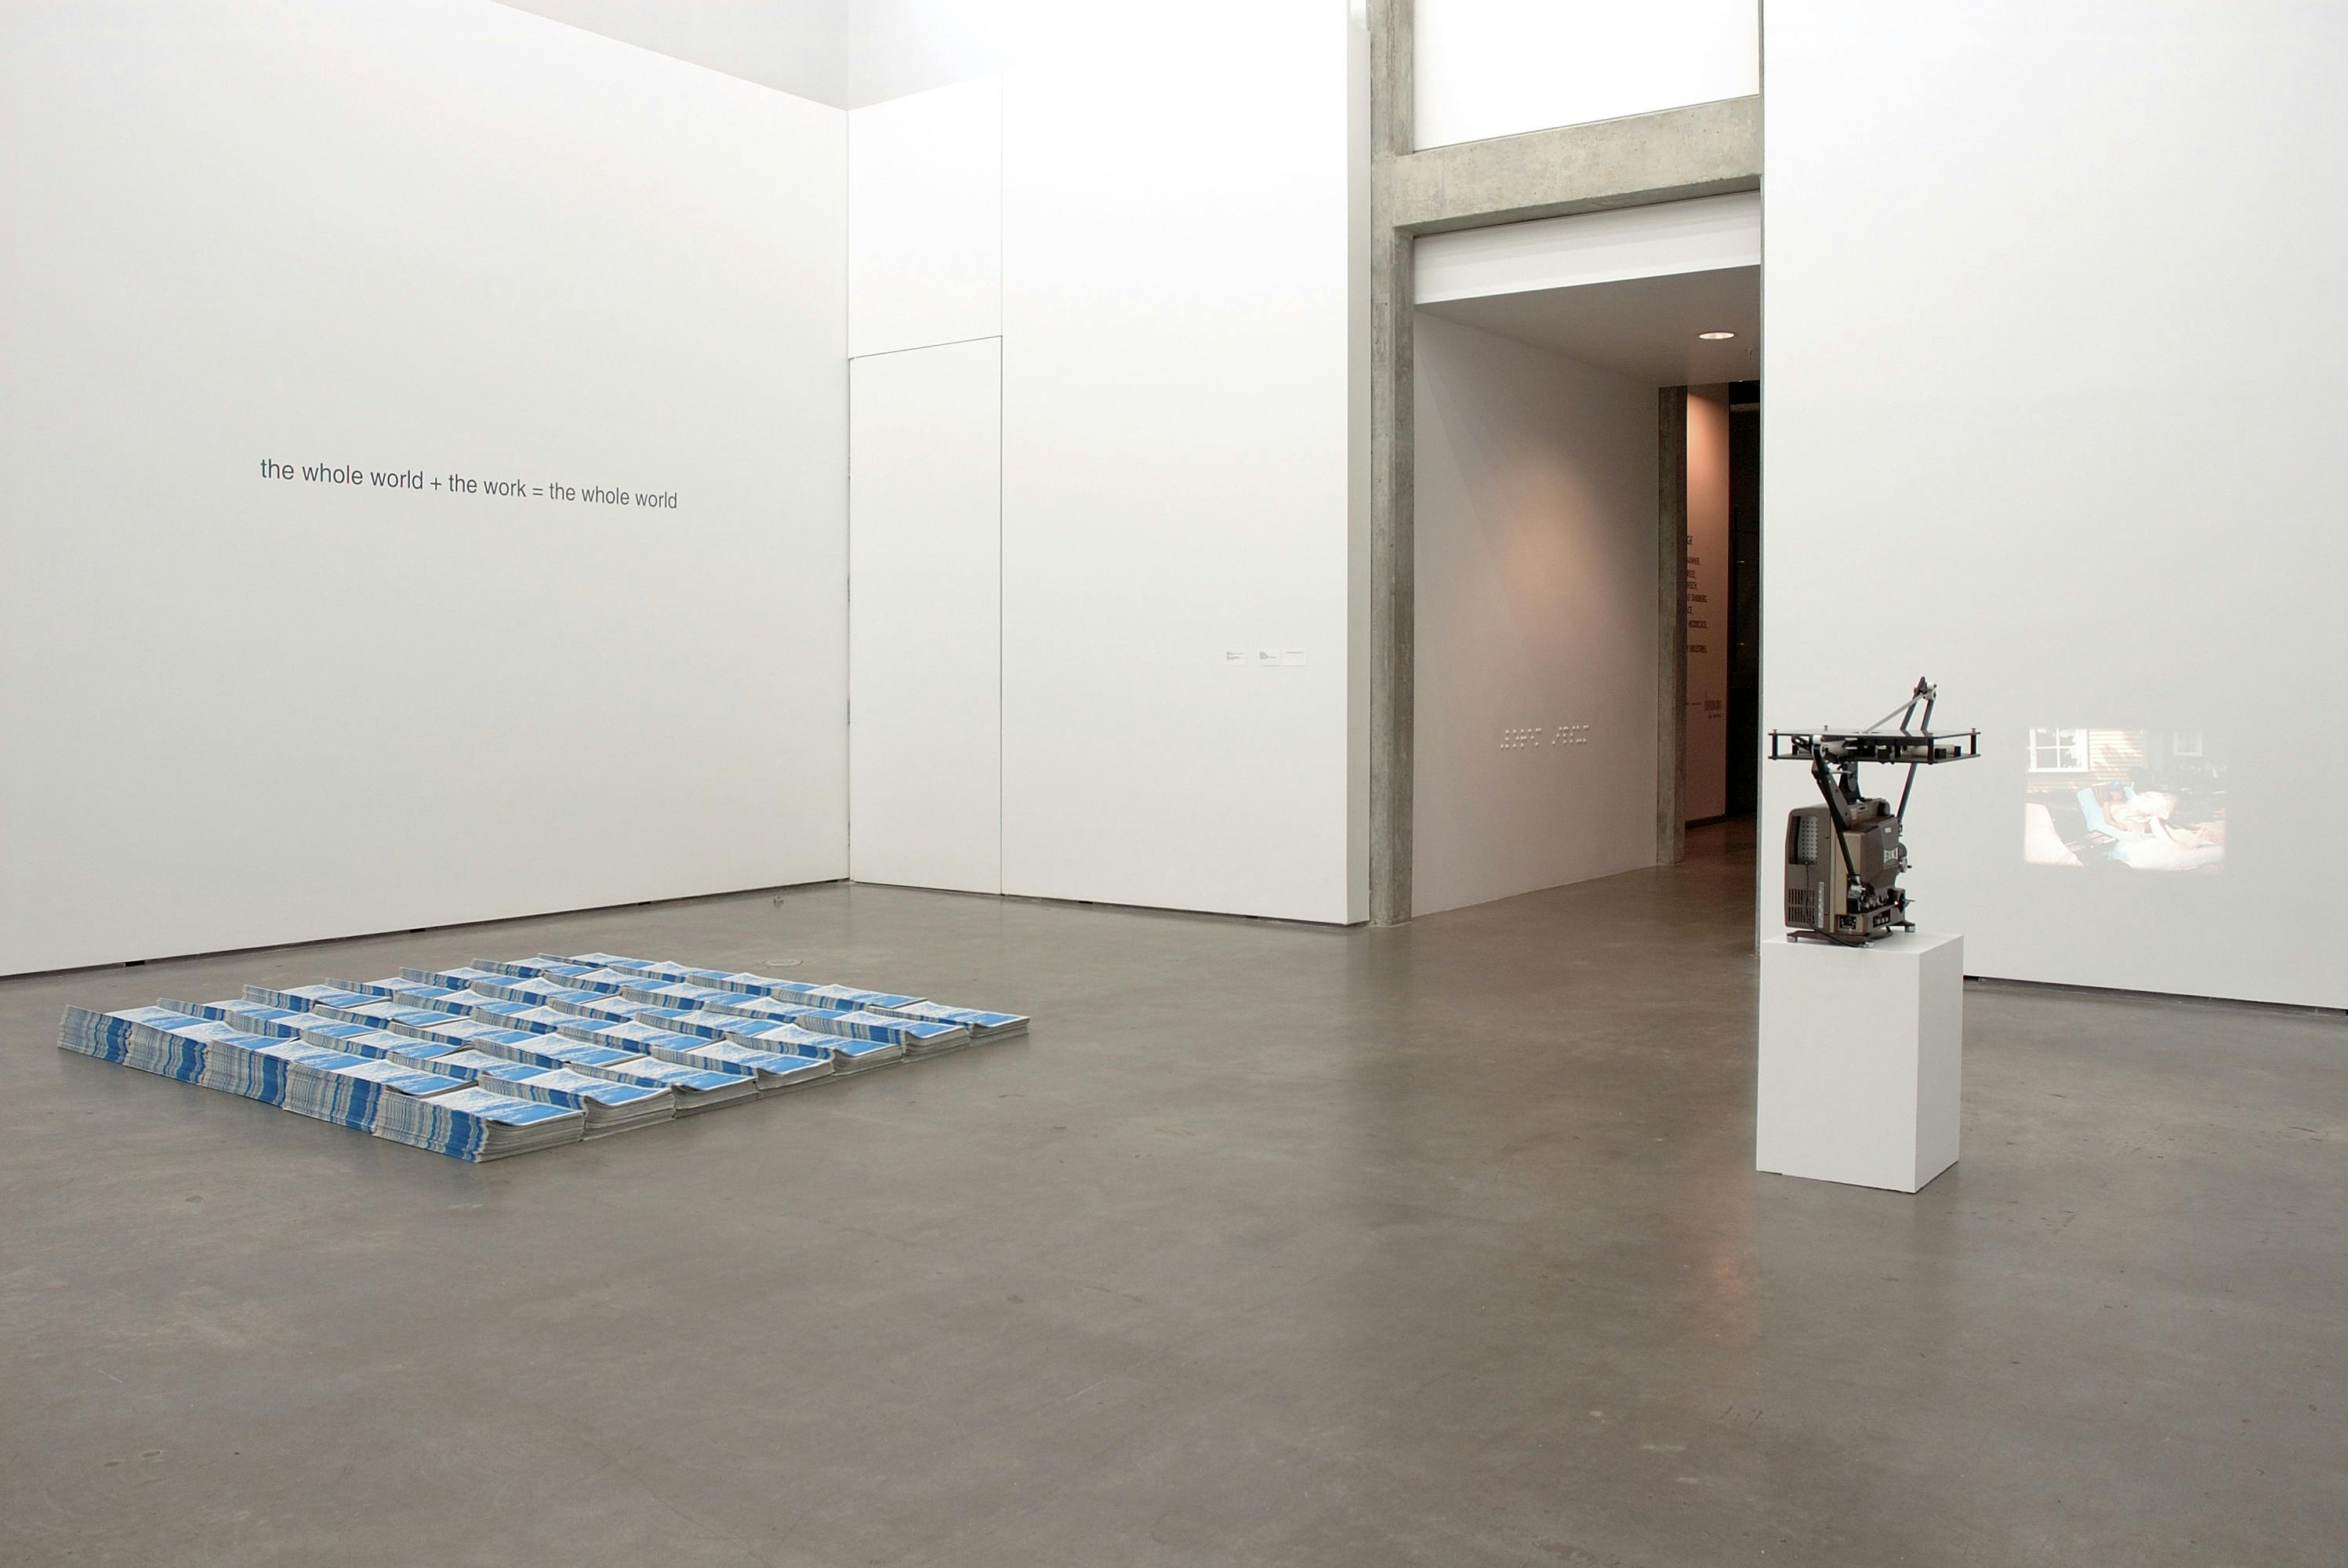 This is an installation shot of a group exhibition titled Concrete Language. Stacks of brochures are placed on the gallery floor. On a wall behind brochures, a text-based artwork is printed. 